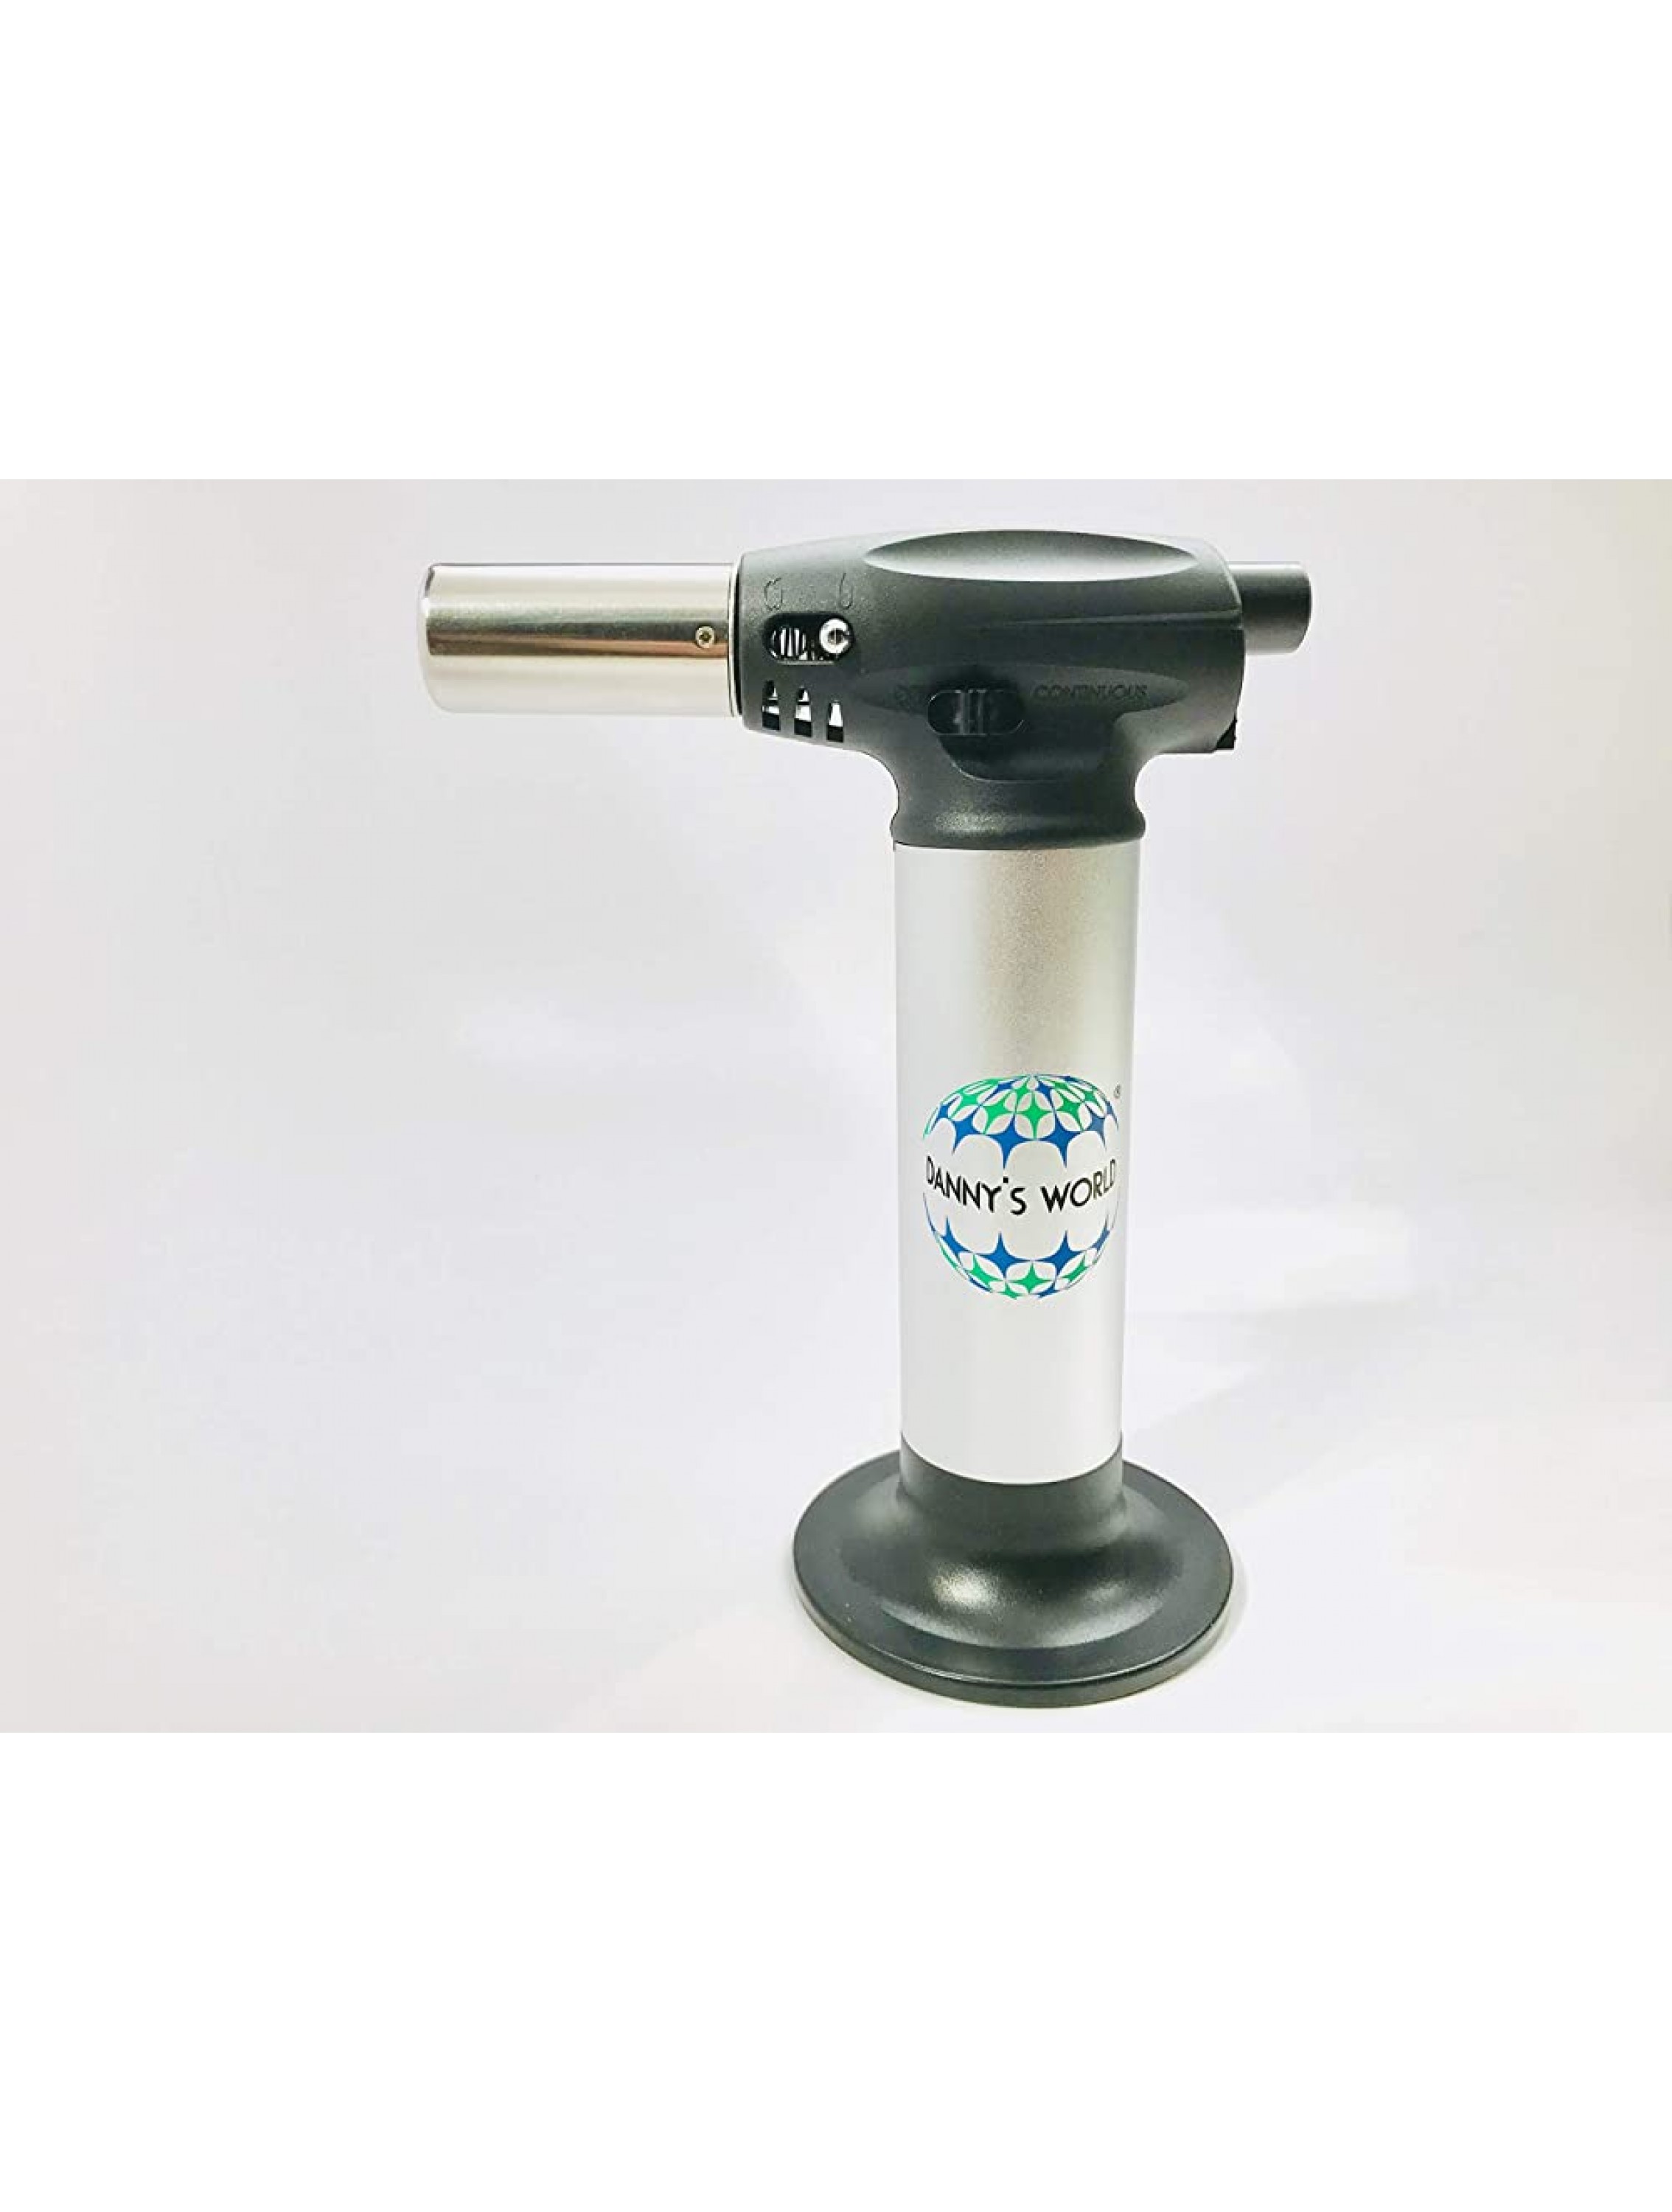 Danny's World Professional Chef's Torch Ideal for Cooking Caramelizing Sugars Custards Flans Meringue Pies and More - BP27E415I